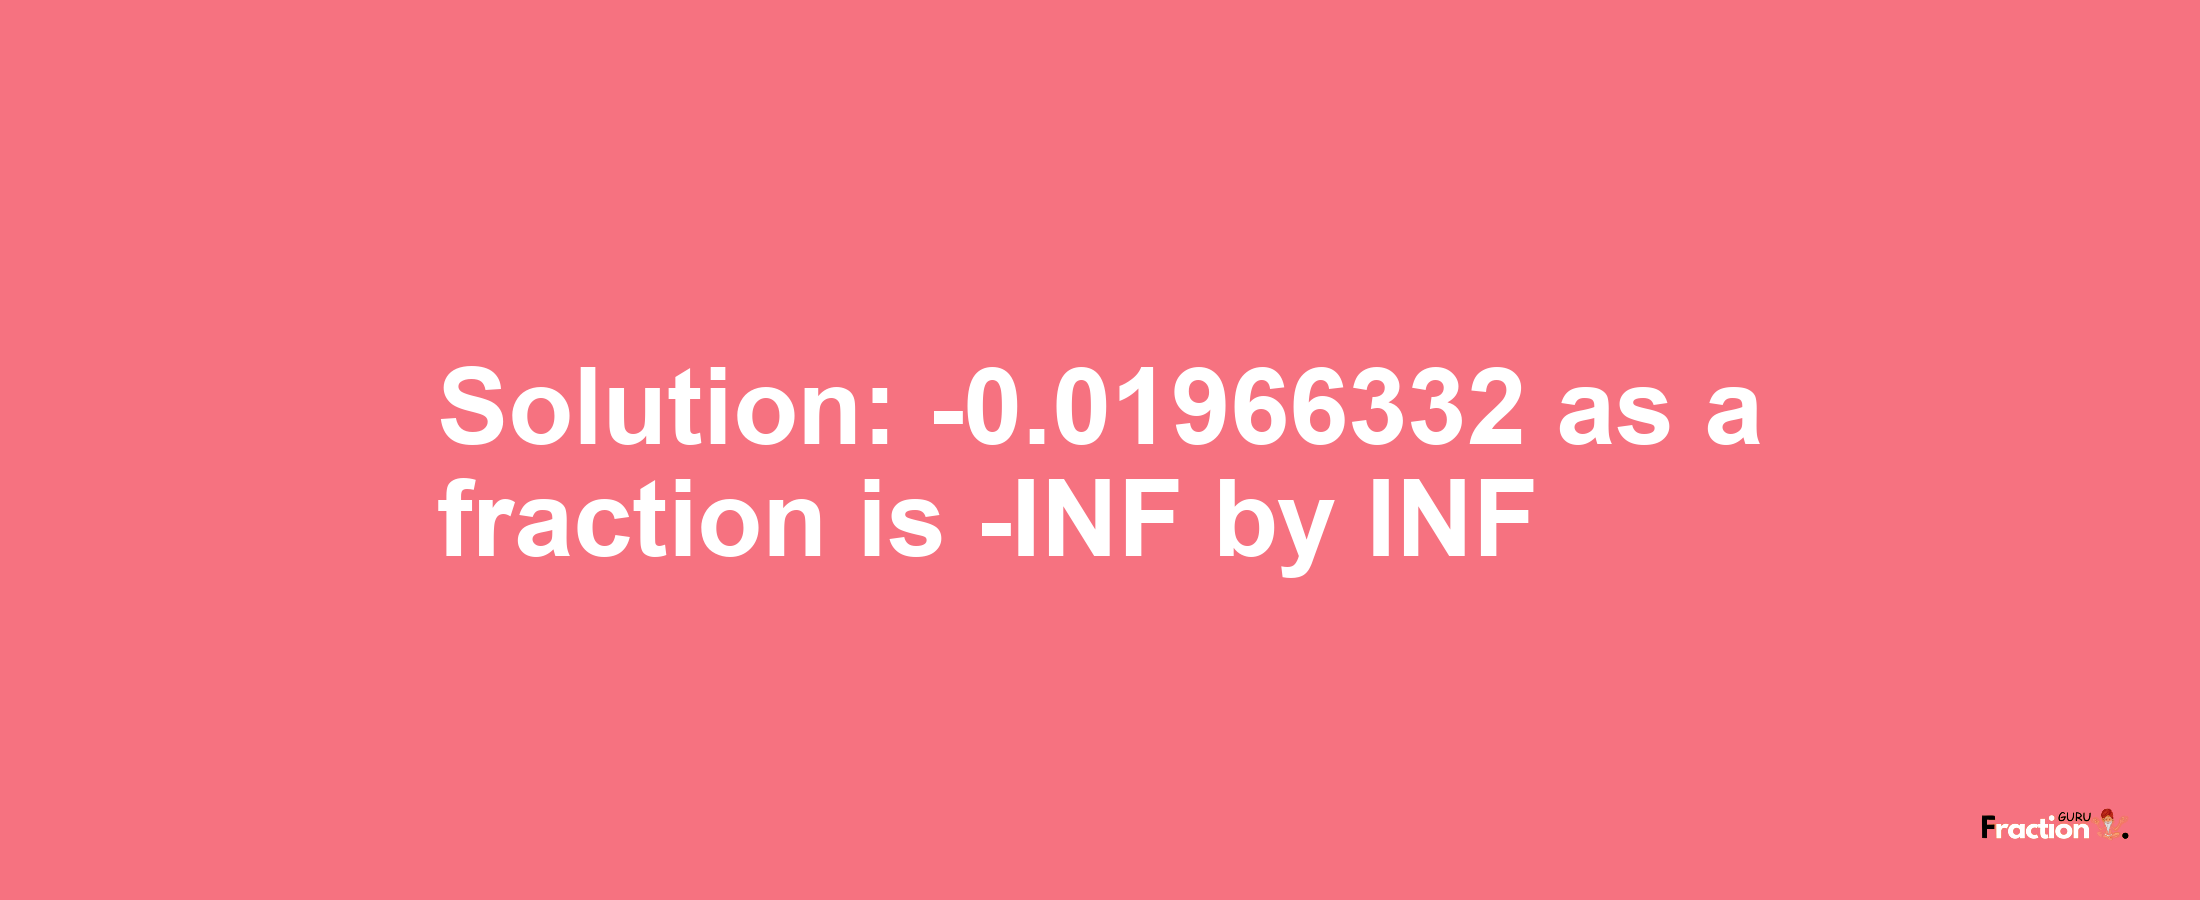 Solution:-0.01966332 as a fraction is -INF/INF